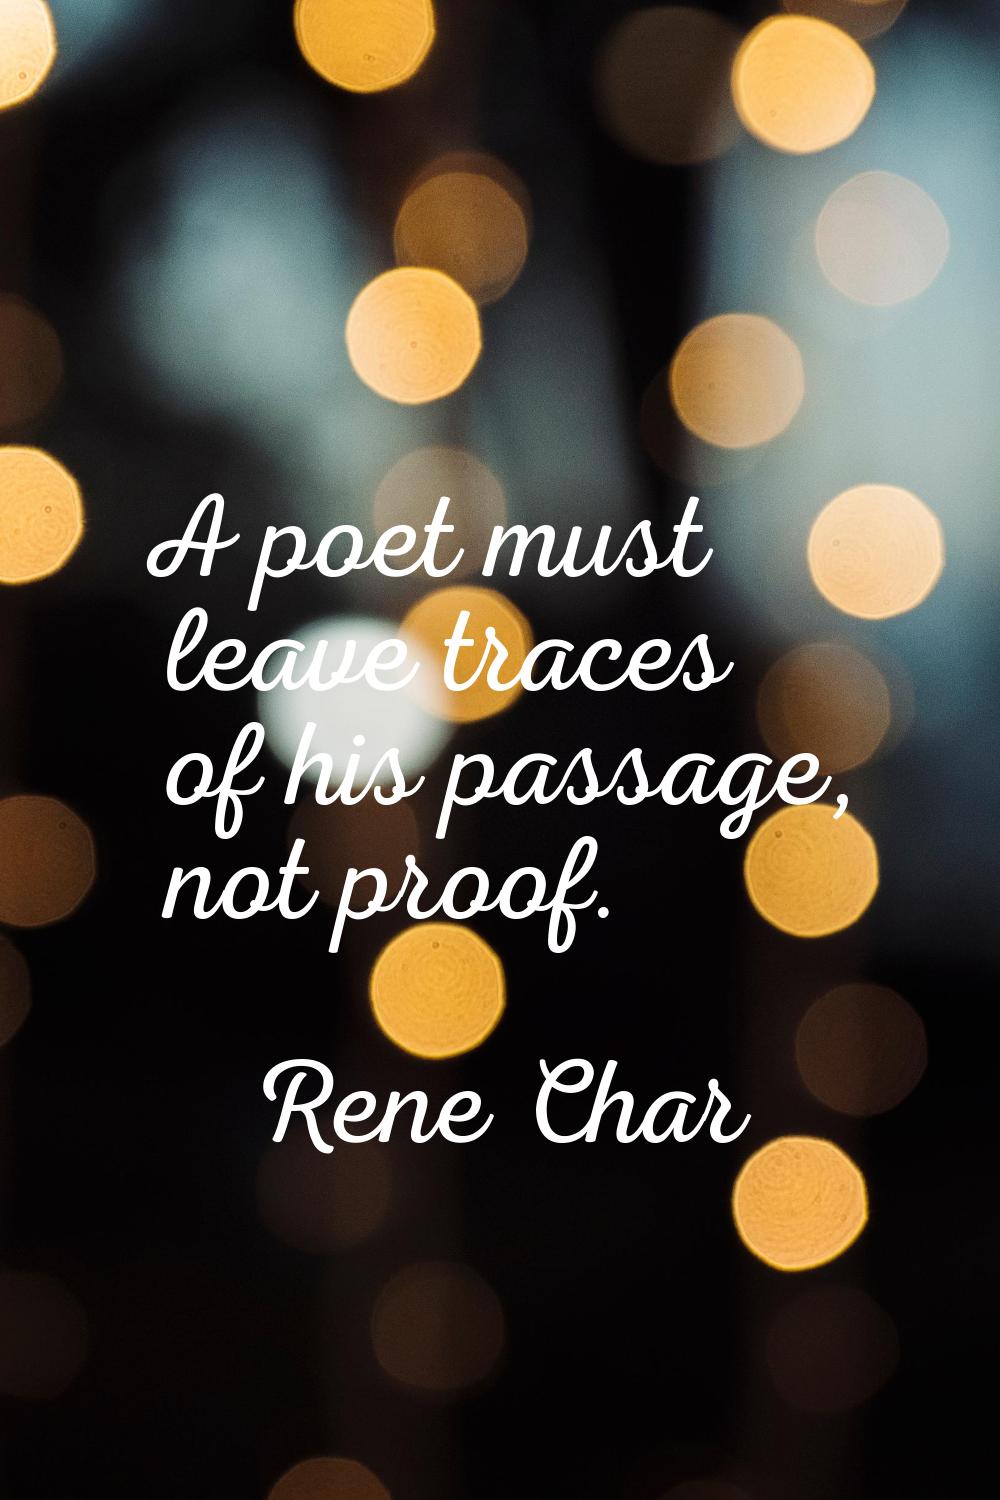 A poet must leave traces of his passage, not proof.